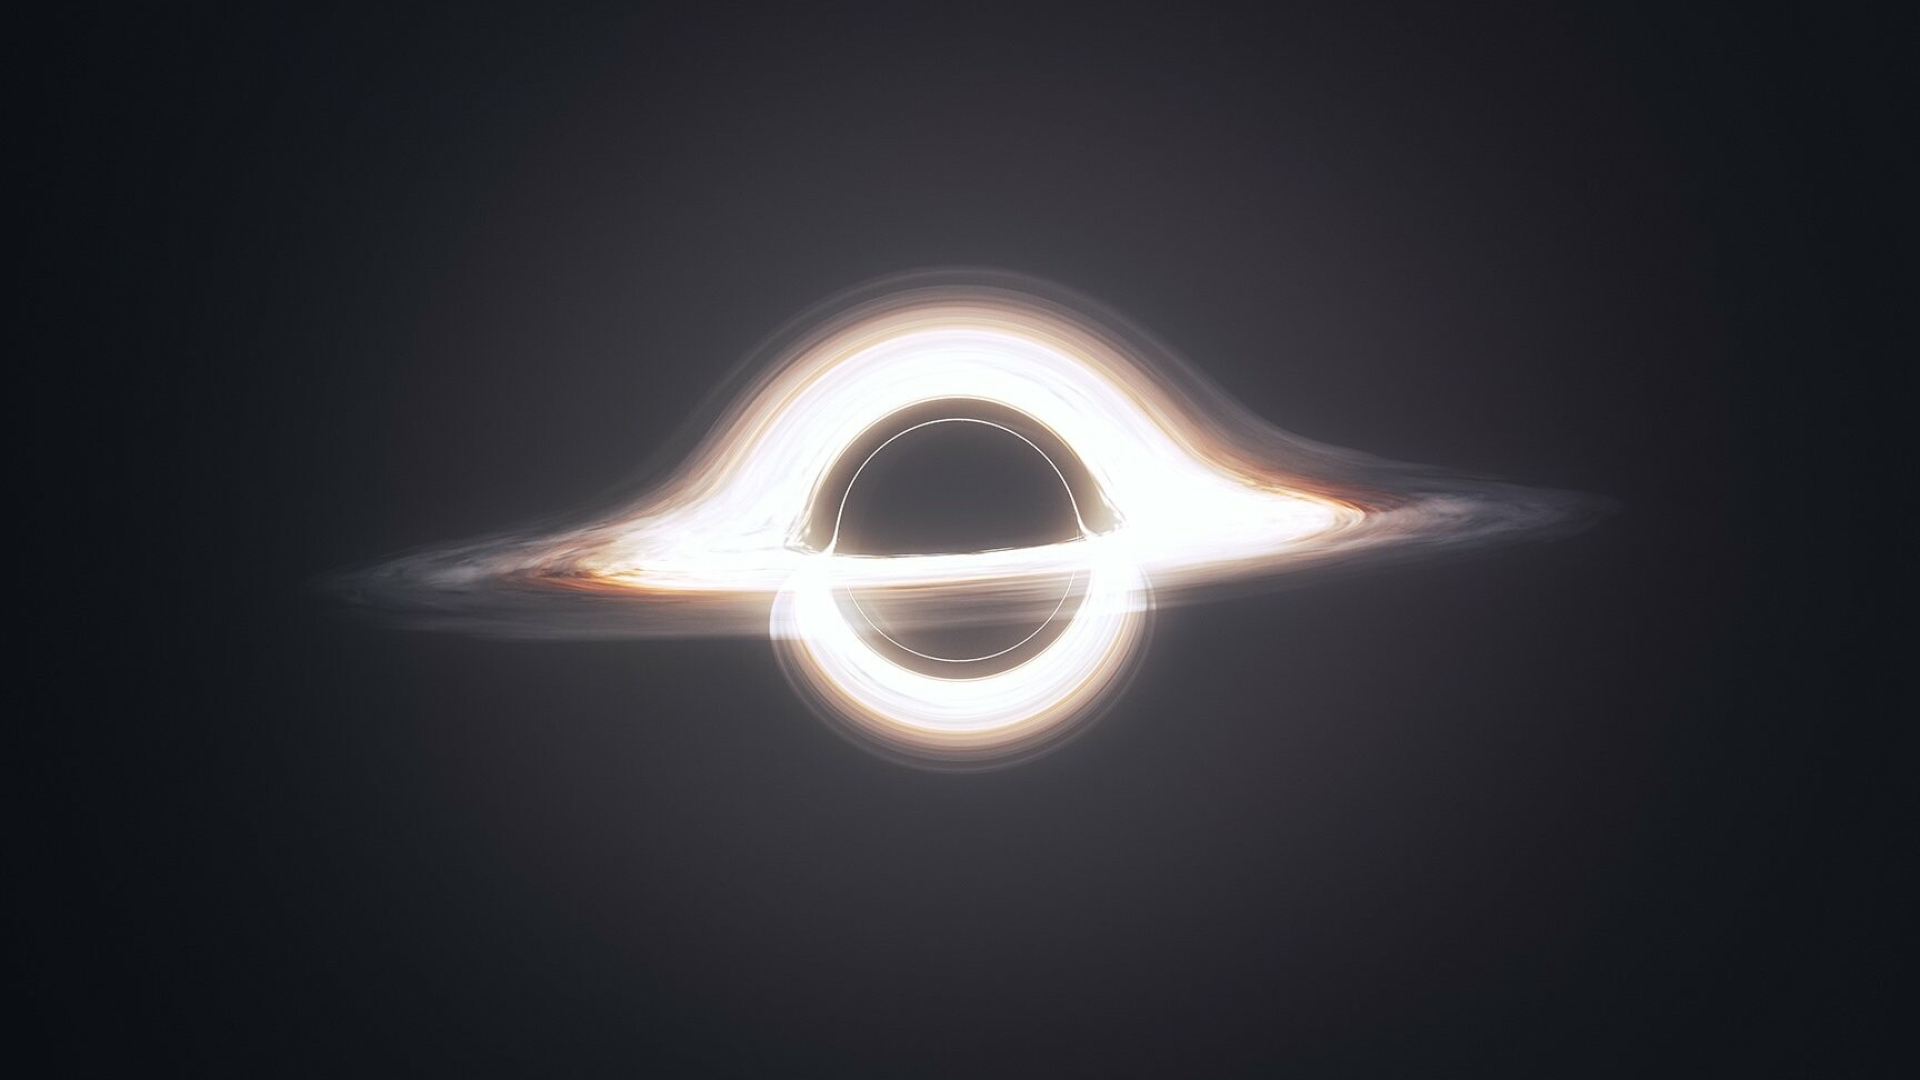 Black Hole: An extremely massive object, Gravitational attraction. 1920x1080 Full HD Wallpaper.